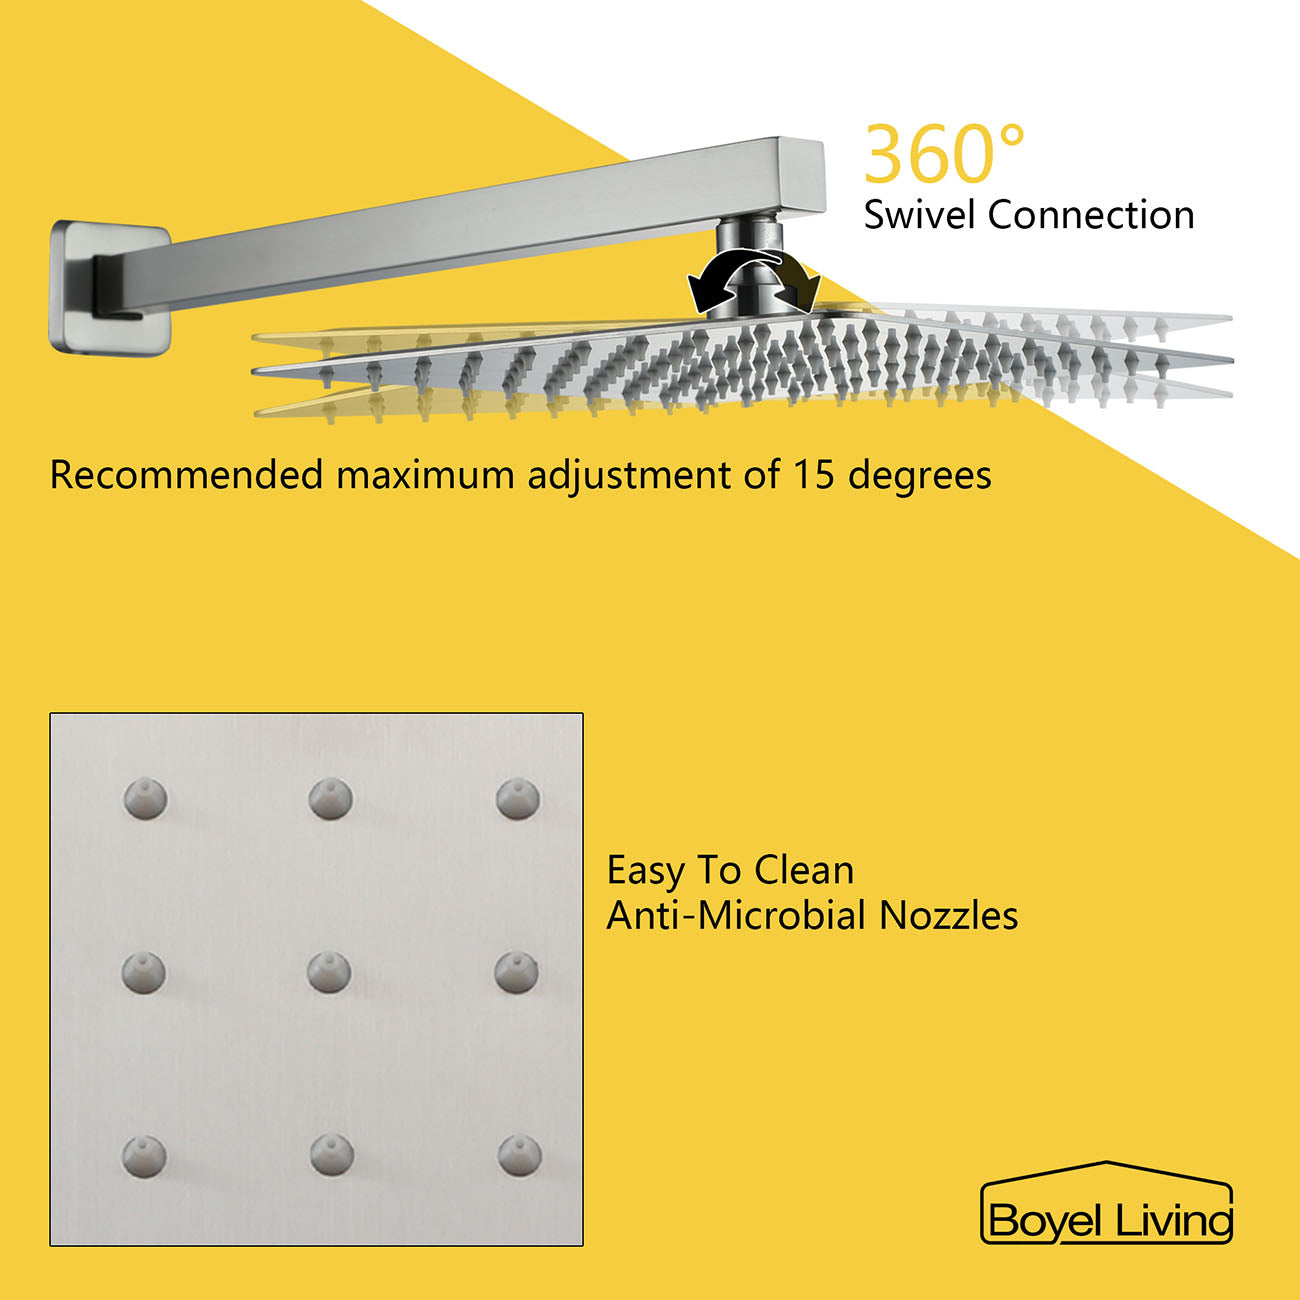 360 Swivel Connection Shower Head